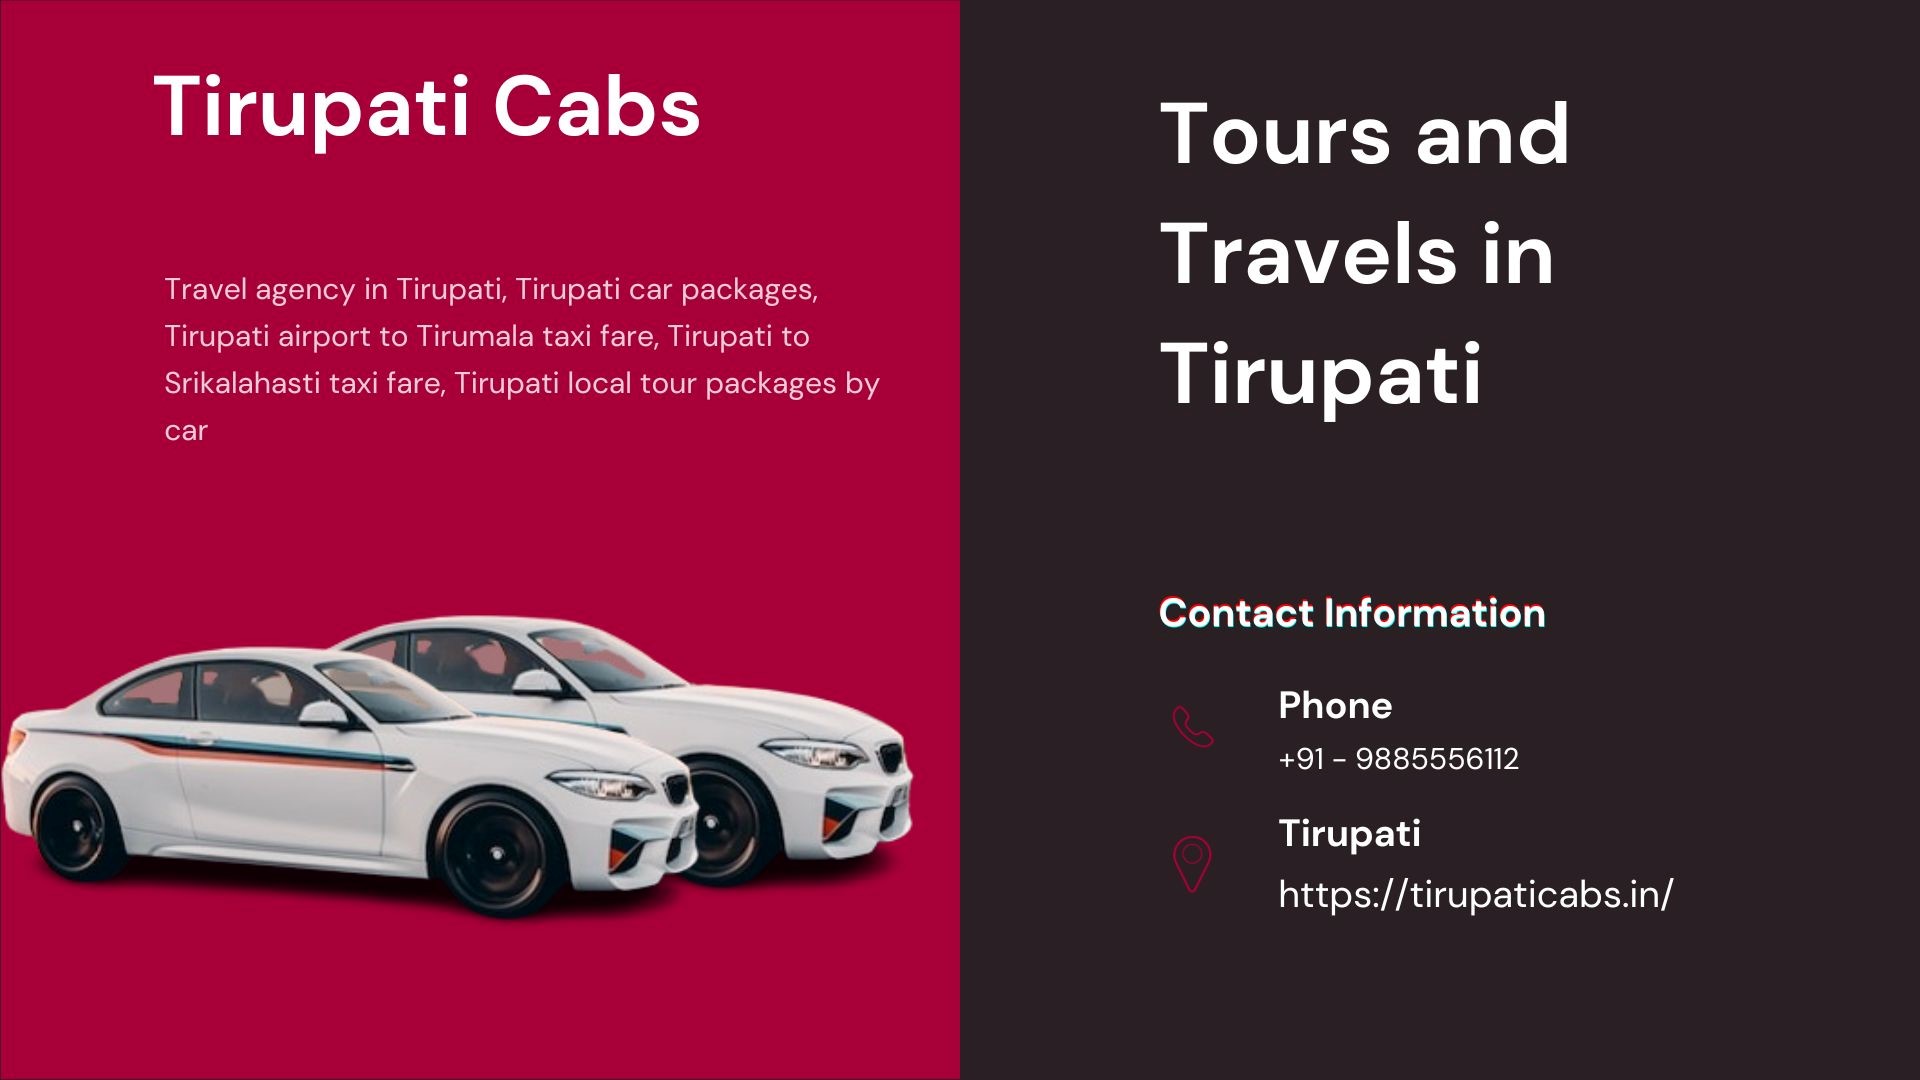 Best Tours and travels in Tirupati 